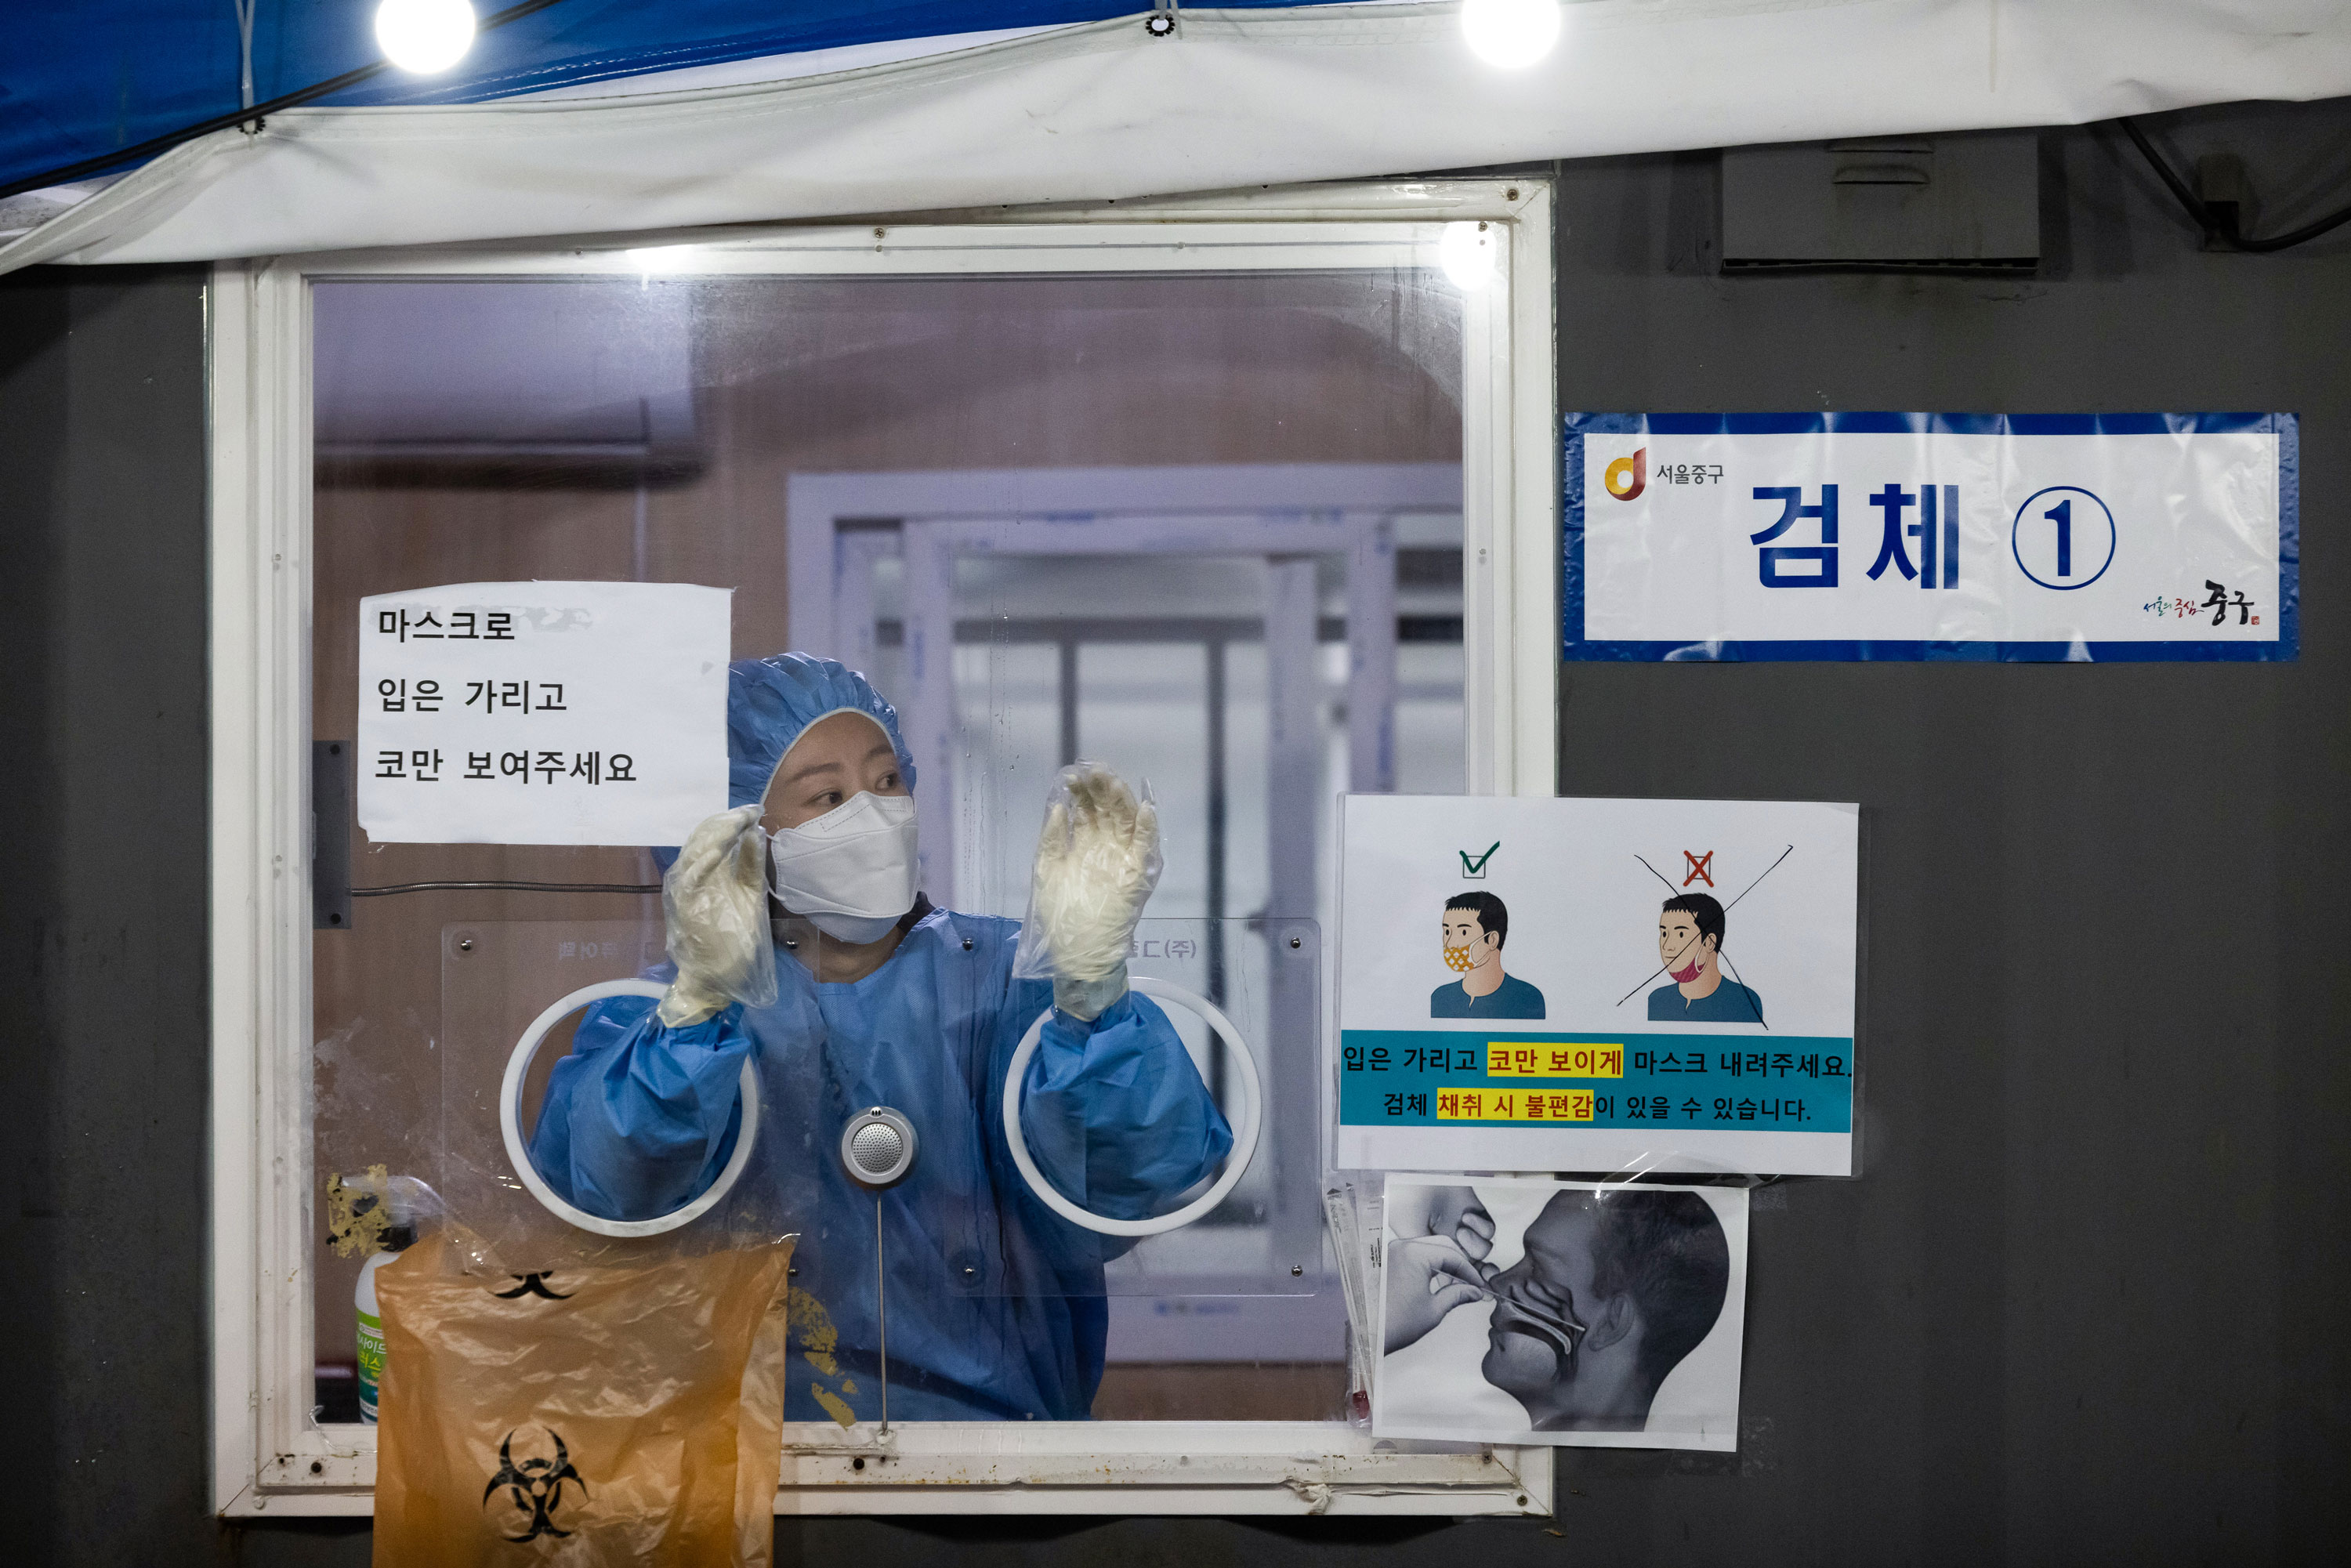 A healthcare worker prepares to administer a Covid-19 test at a temporary testing site outside Seoul Station in Seoul, South Korea, on Tuesday, Nov. 30, 2021.